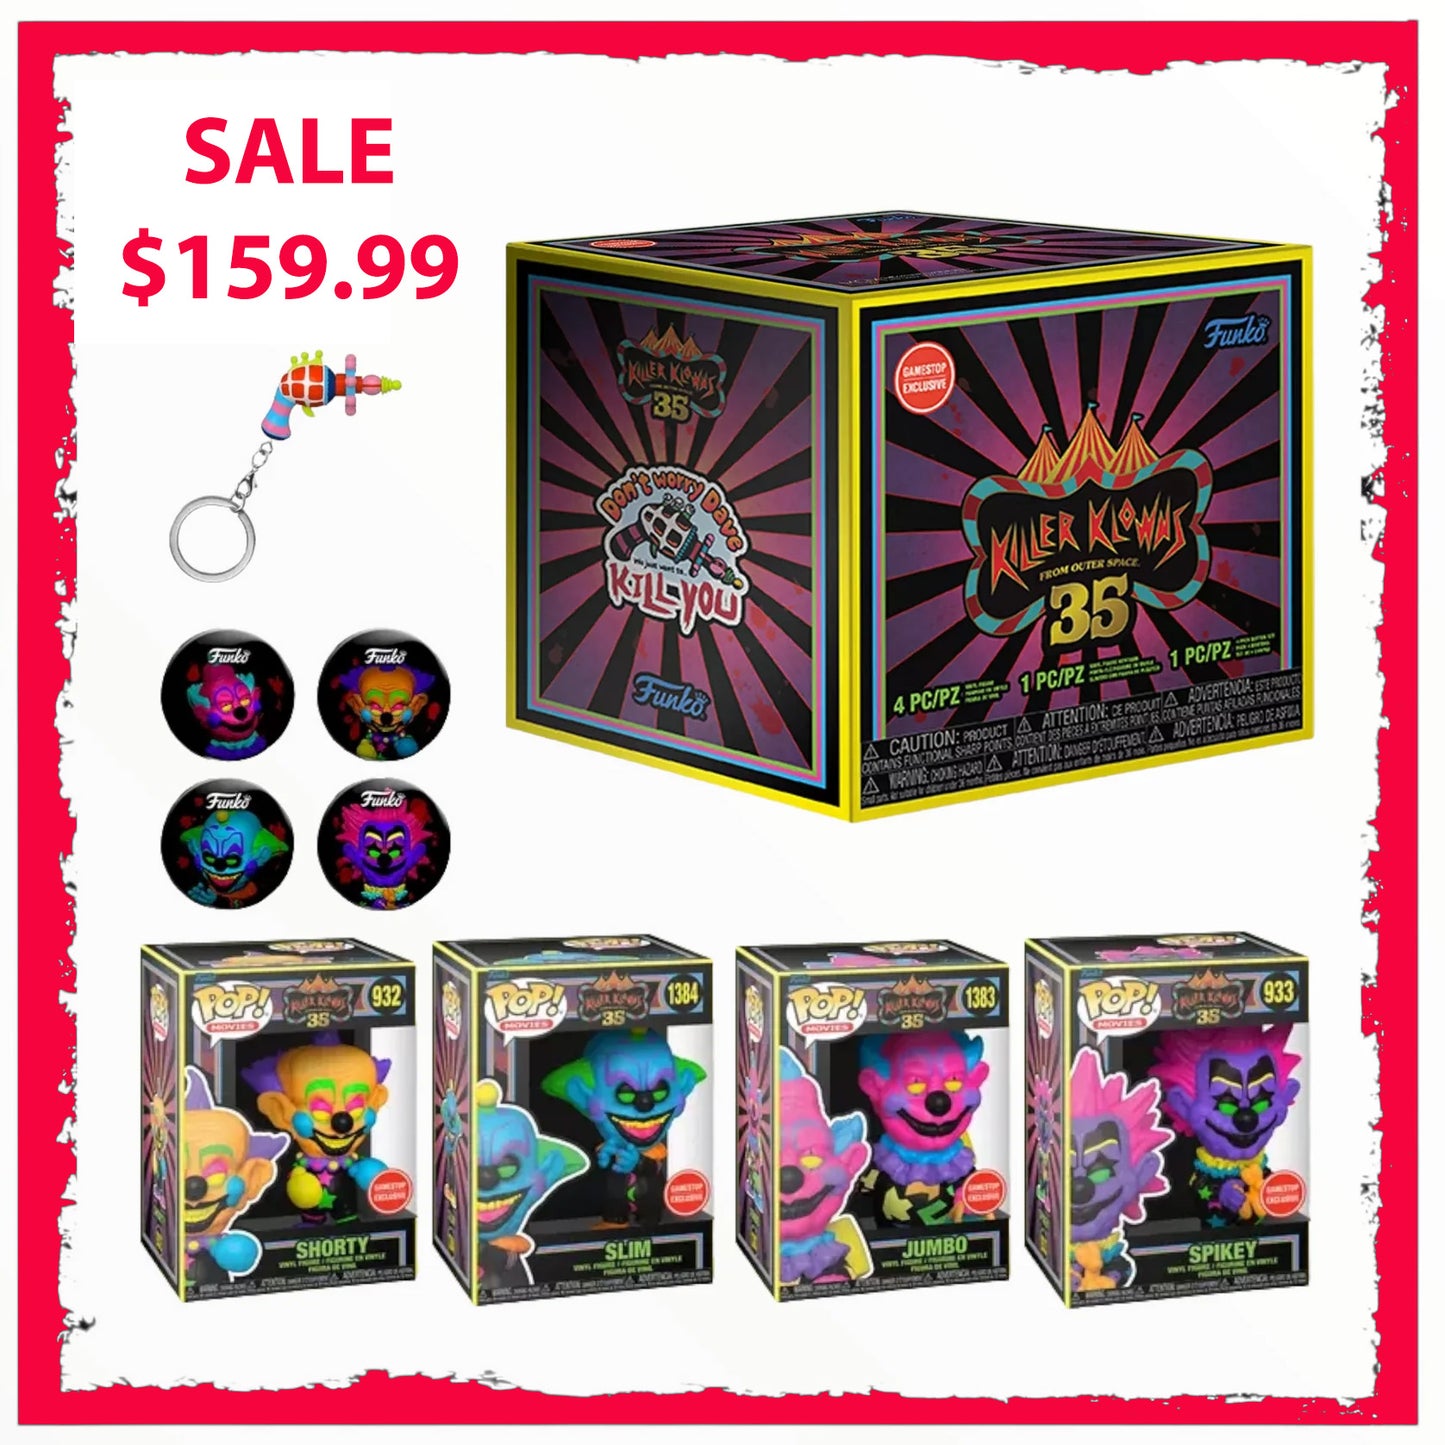 New Sealed Killer Klowns from Outer Space 35th Anniversary Black Light Pop! Figures Collector's Box